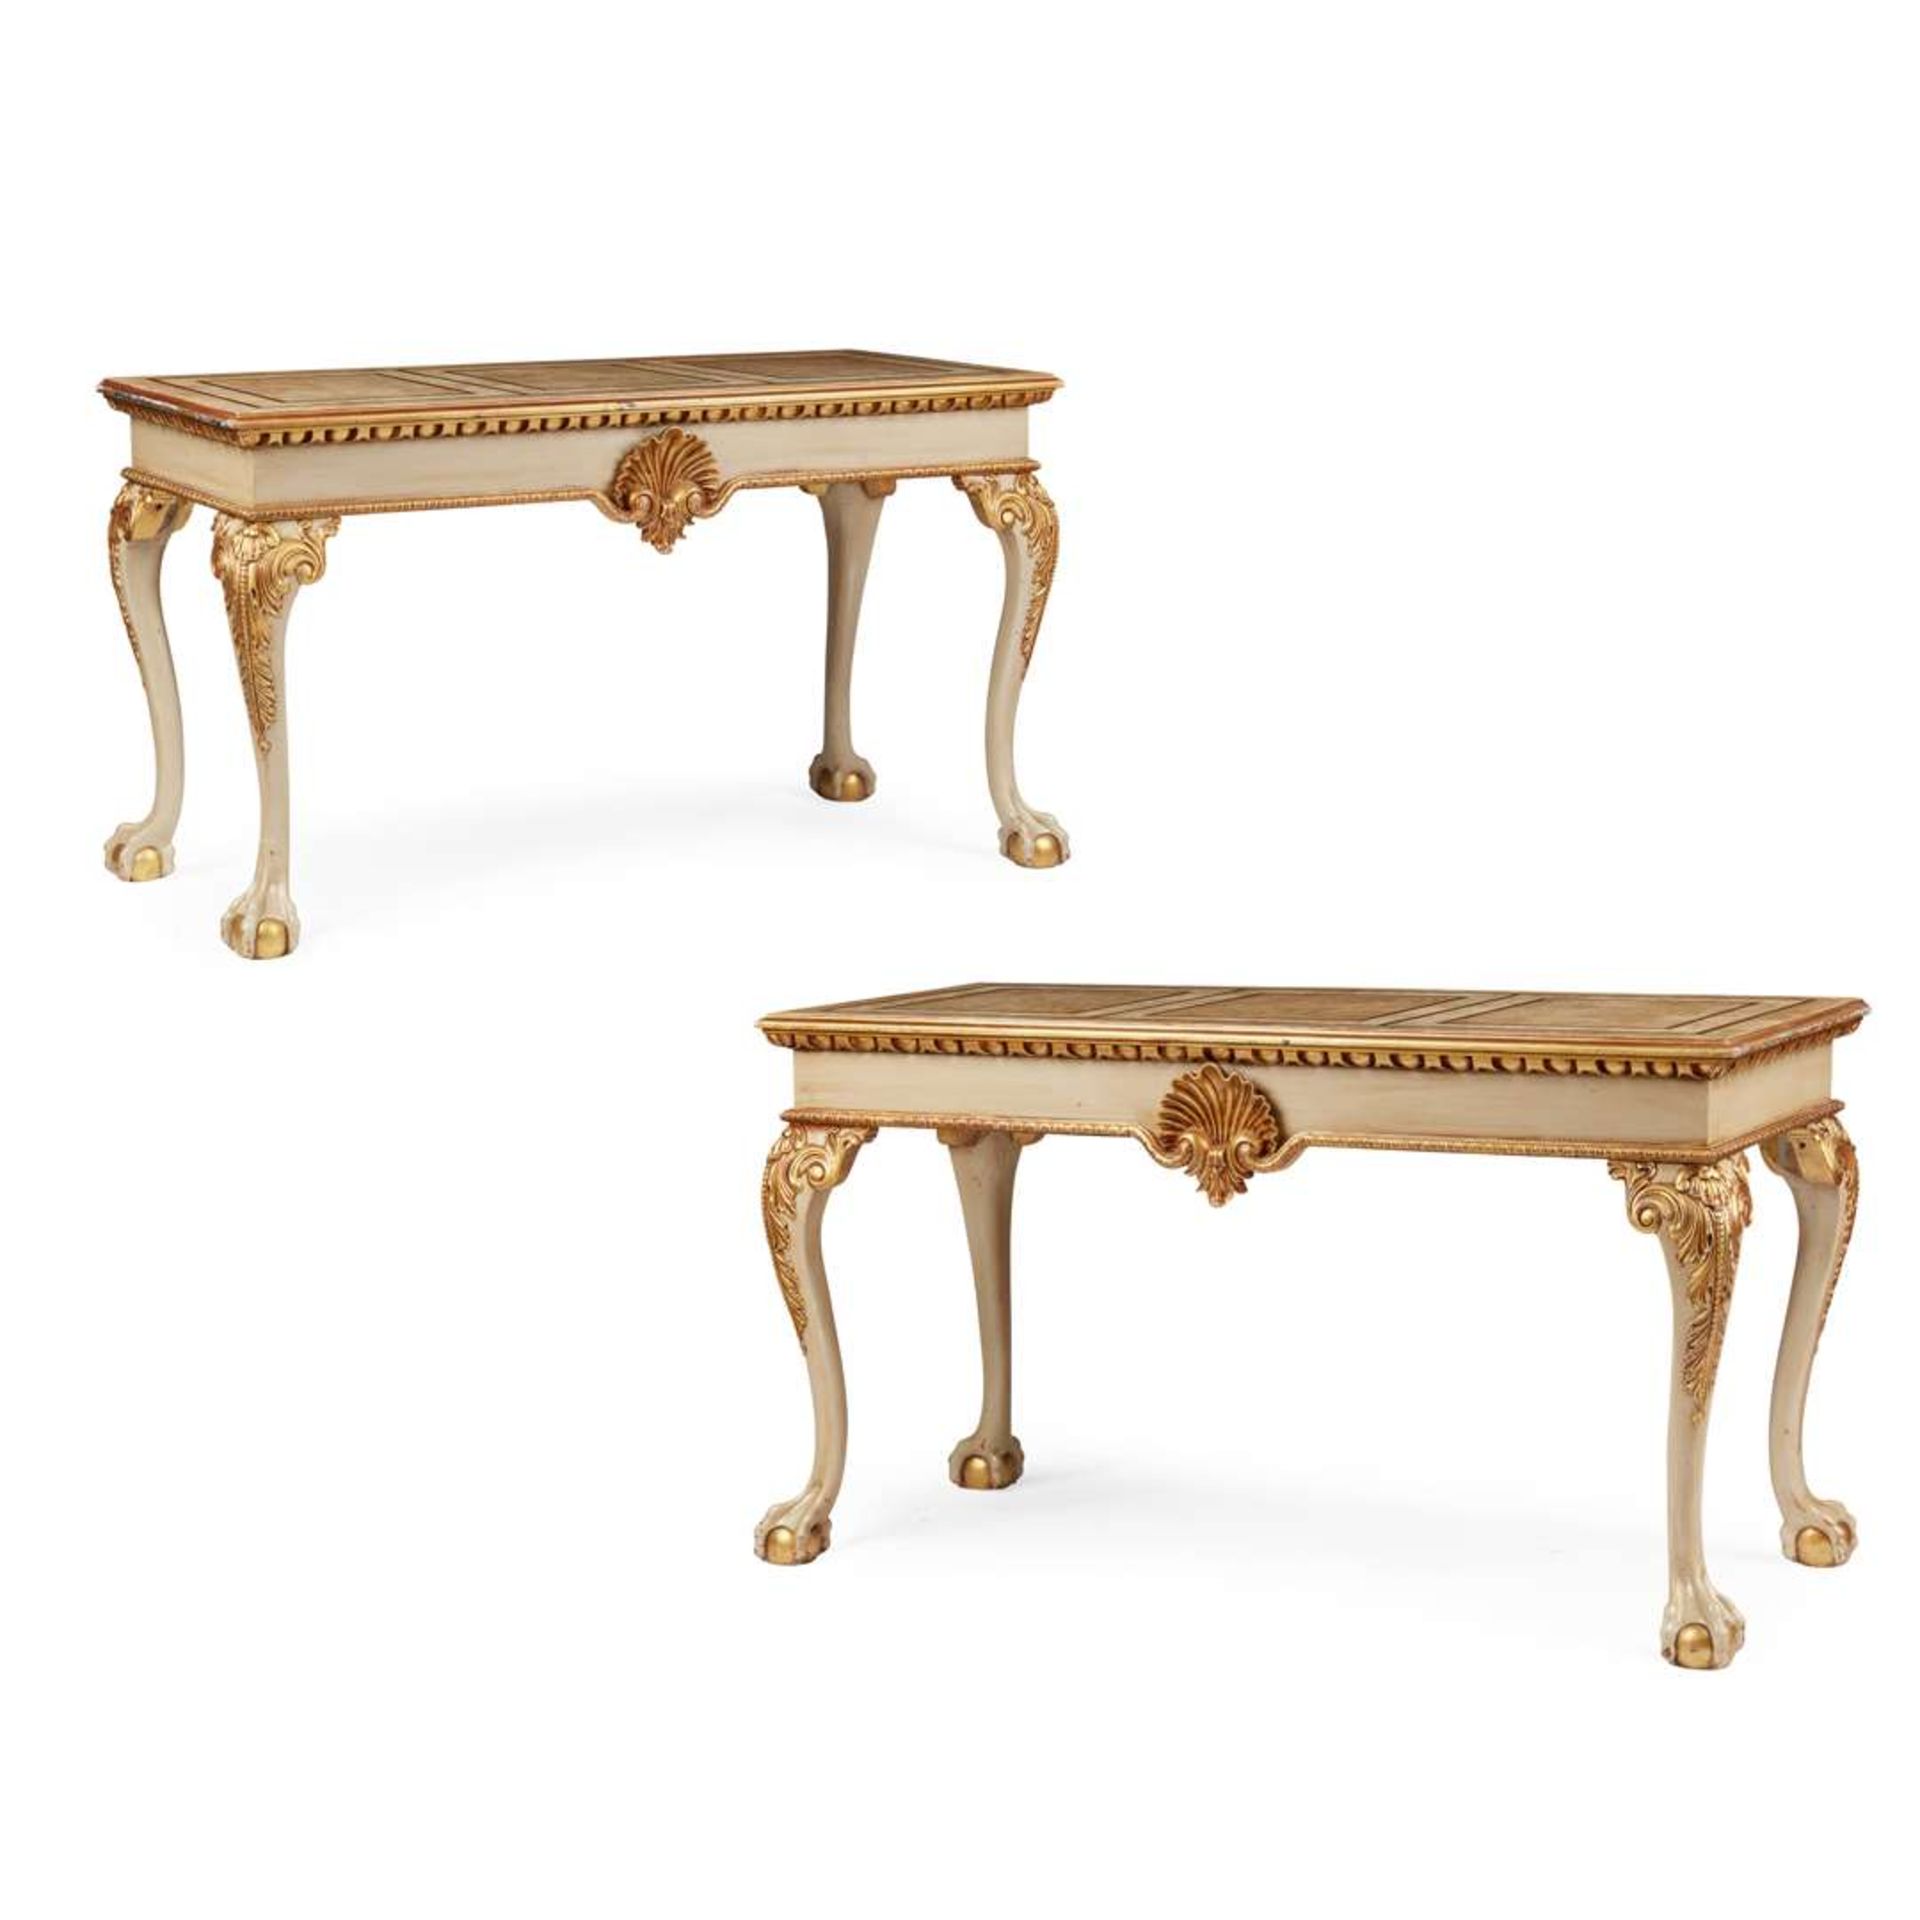 PAIR OF GEORGE II STYLE PAINTED AND PARCEL GILT SIDE TABLES